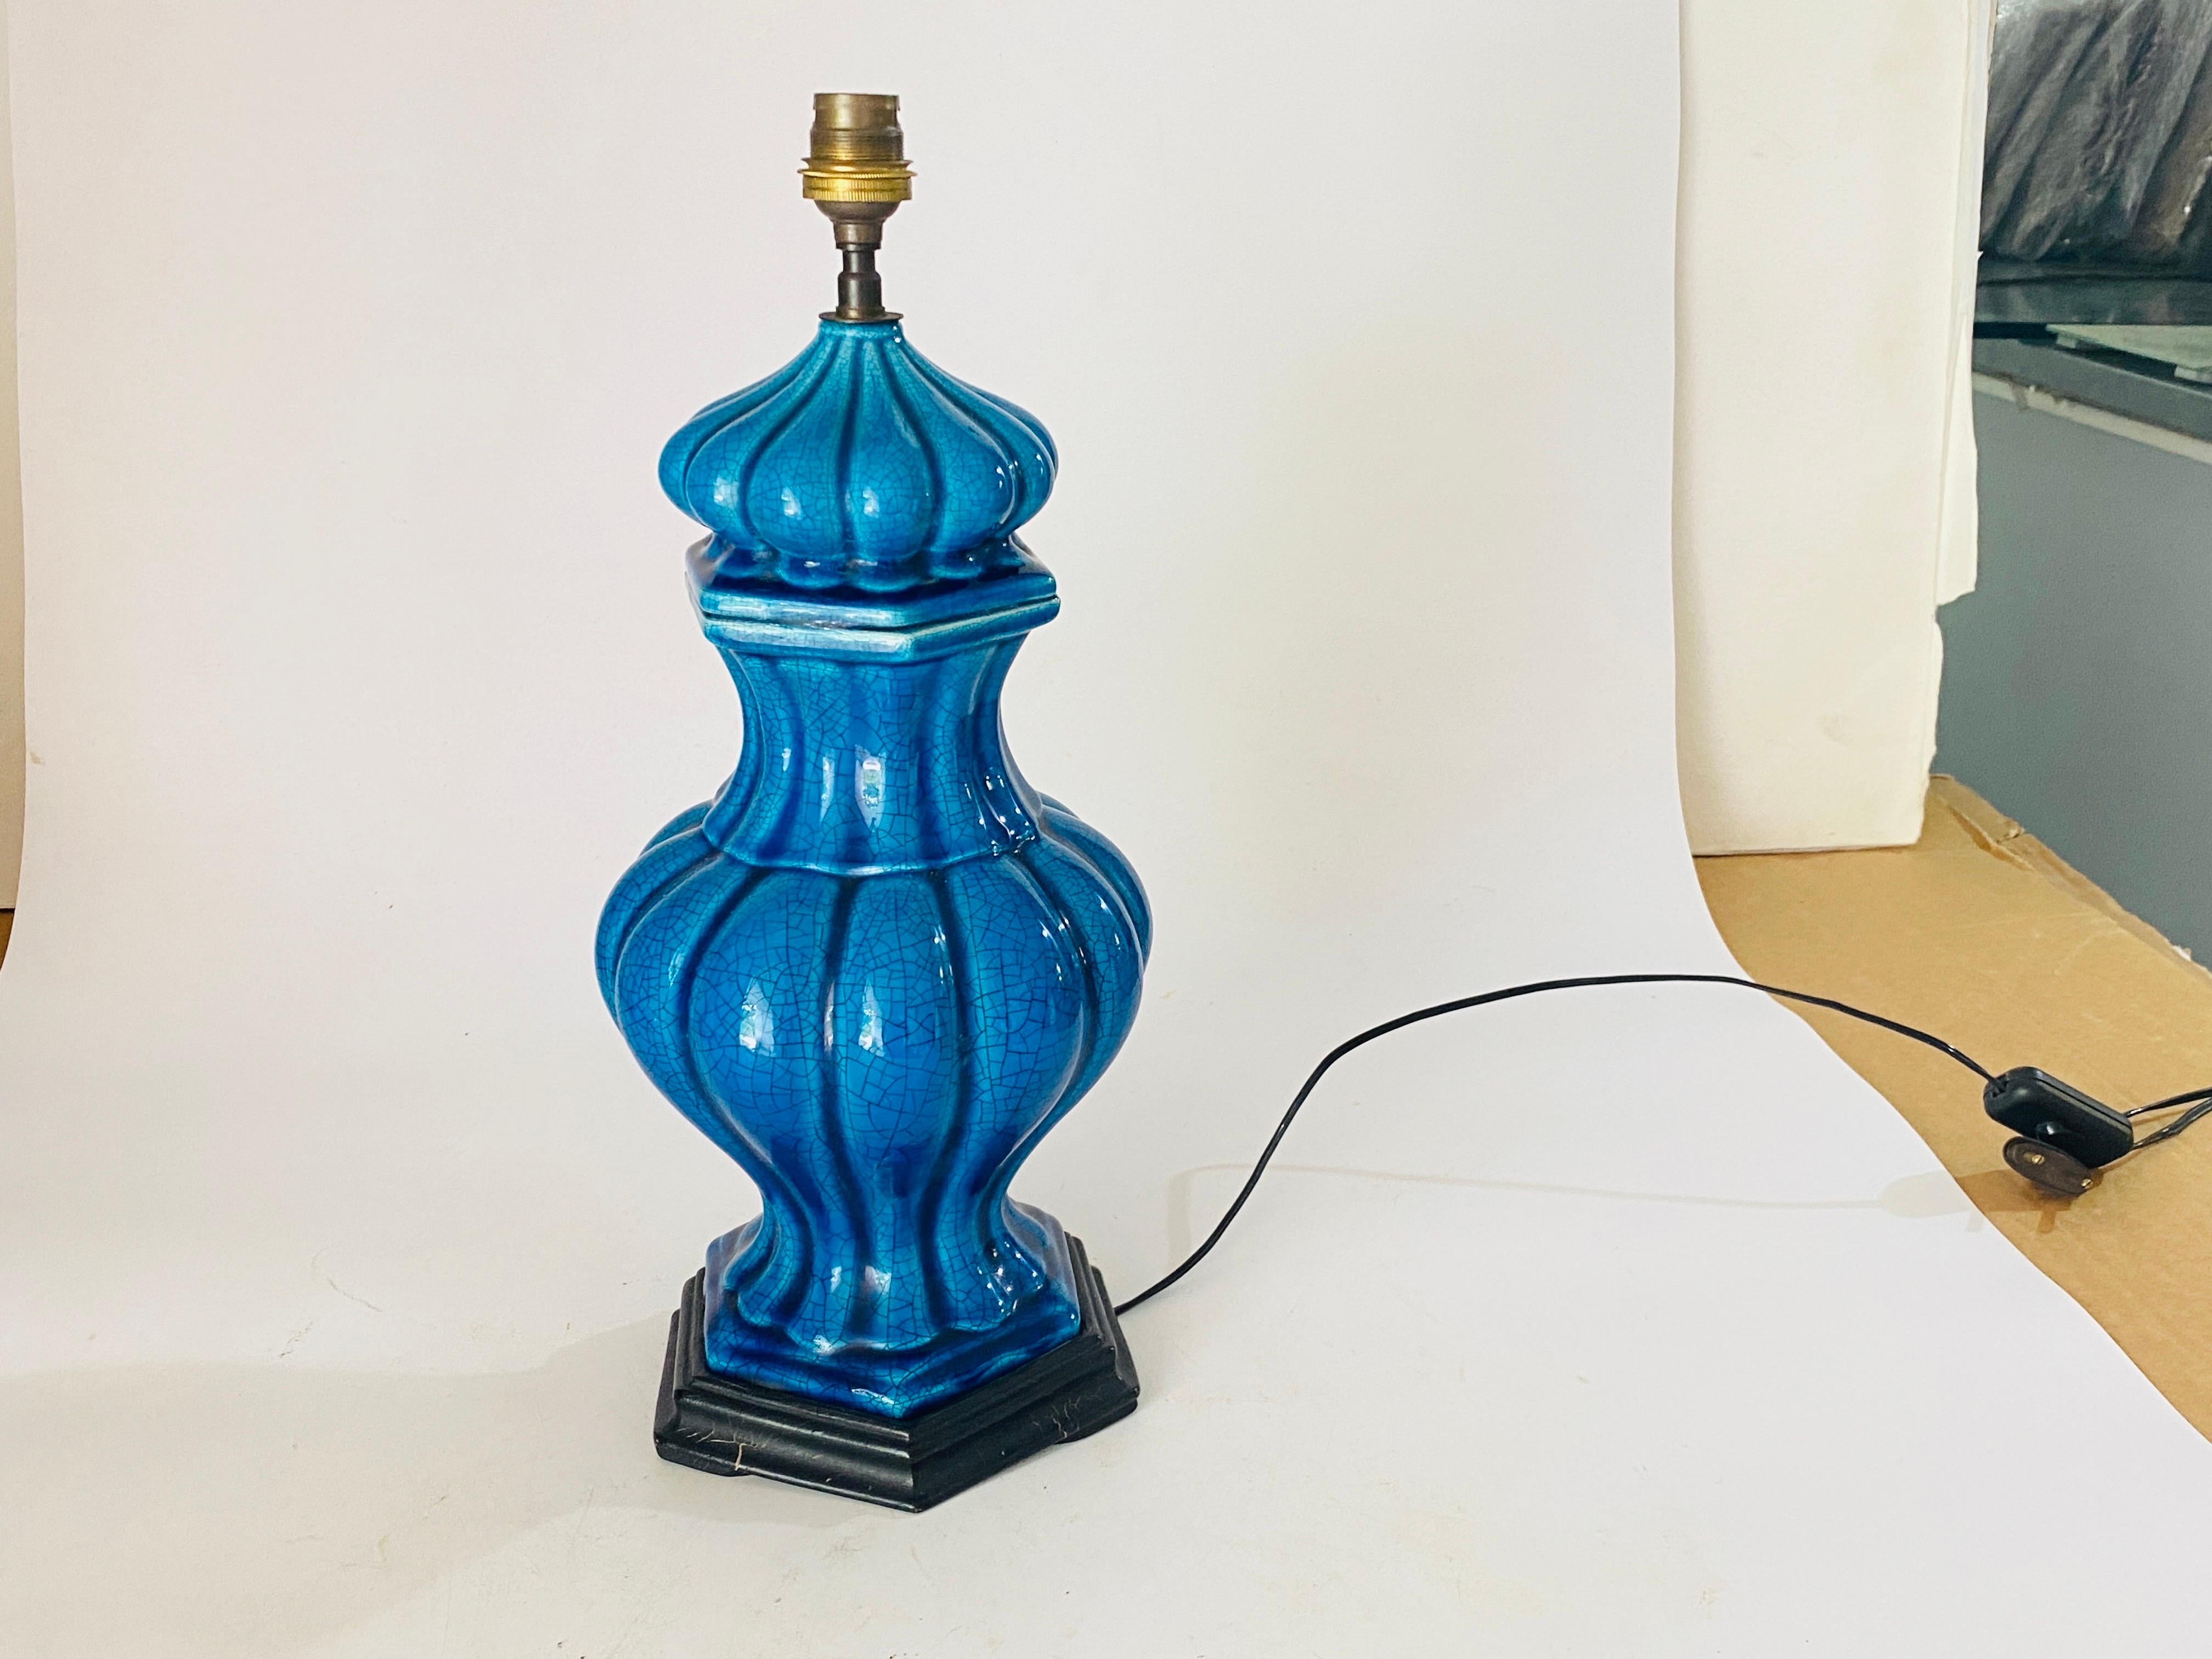 French Table Lamp in Crakled Enemeled Blue Ceramic, France, 1970 For Sale